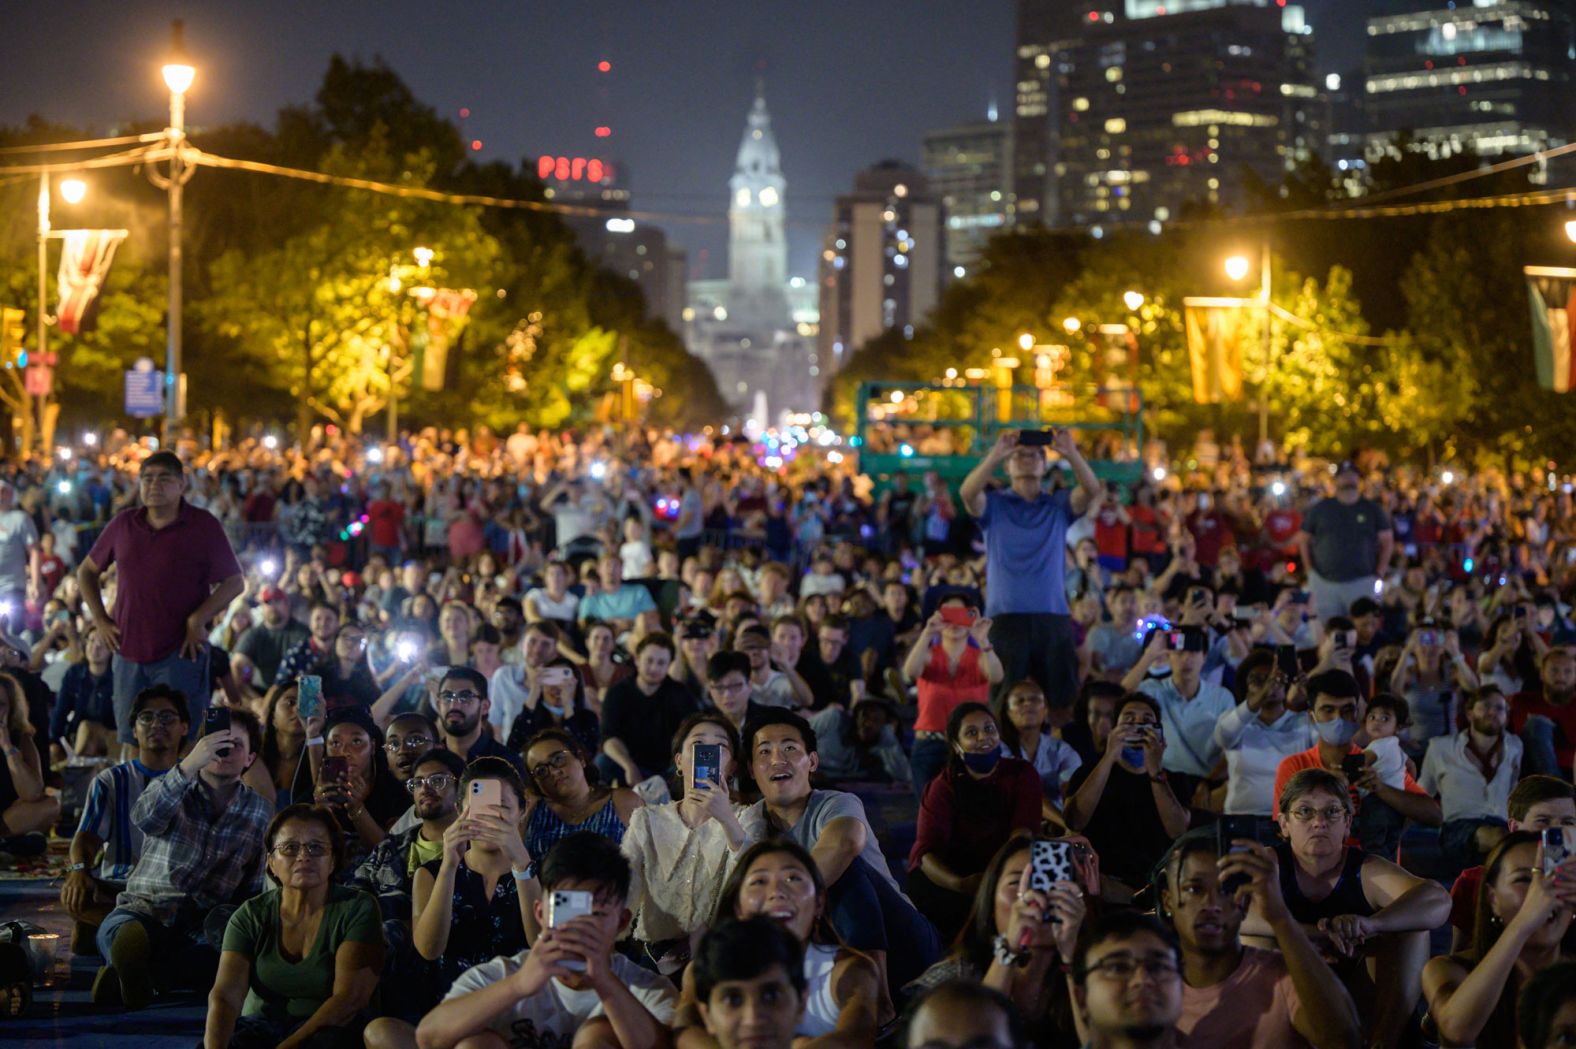 Spectators watch the annual Independence Day fireworks display outside the Philadelphia Museum of Art in Philadelphia on July 4.